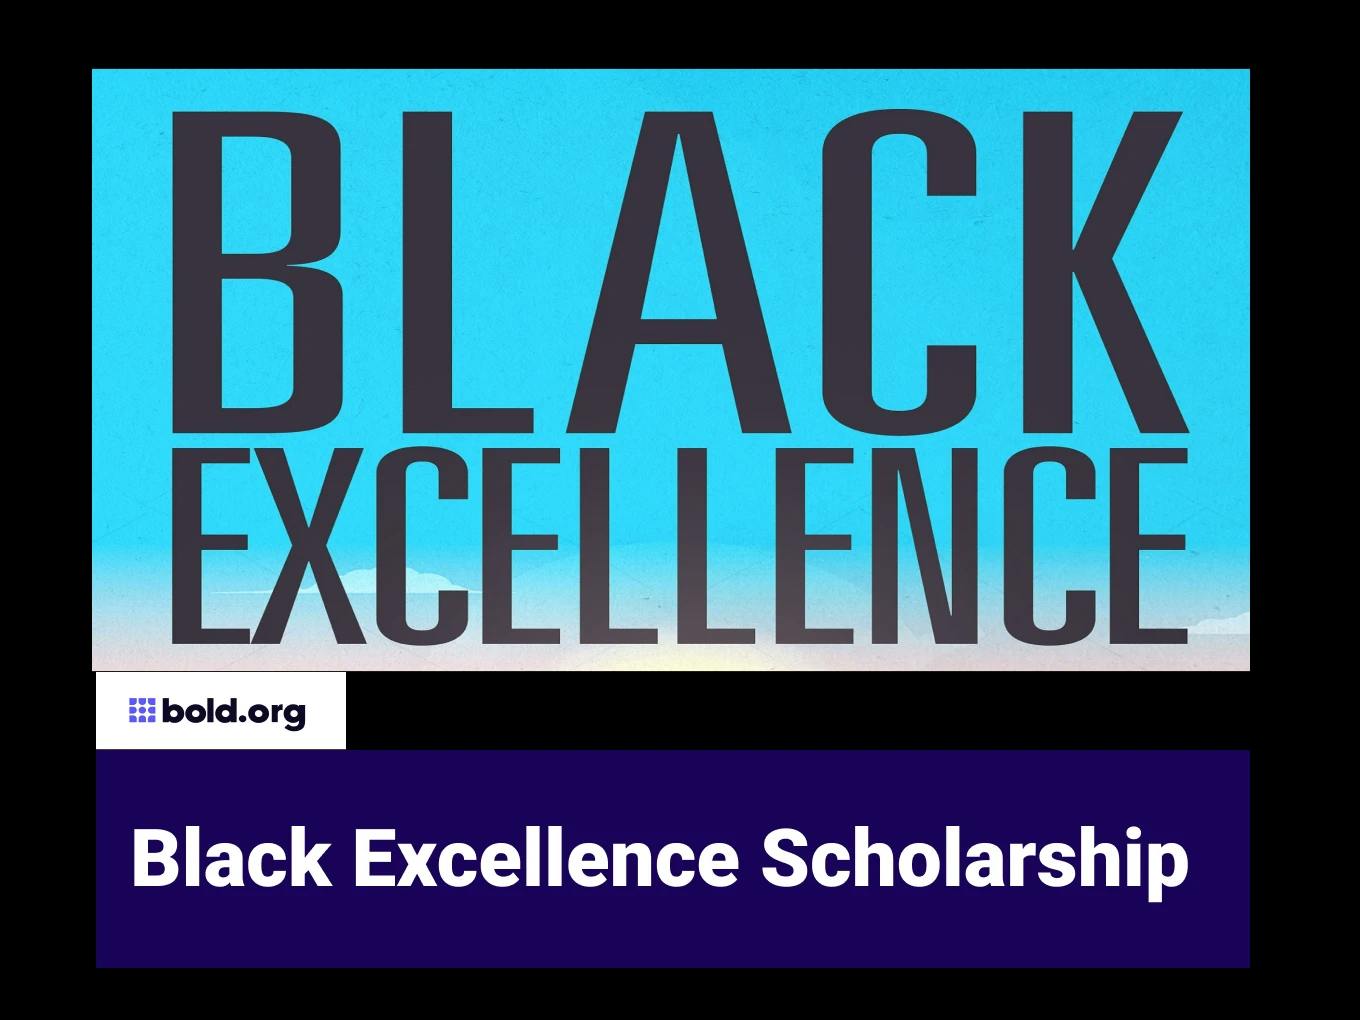 Black Excellence Scholarship